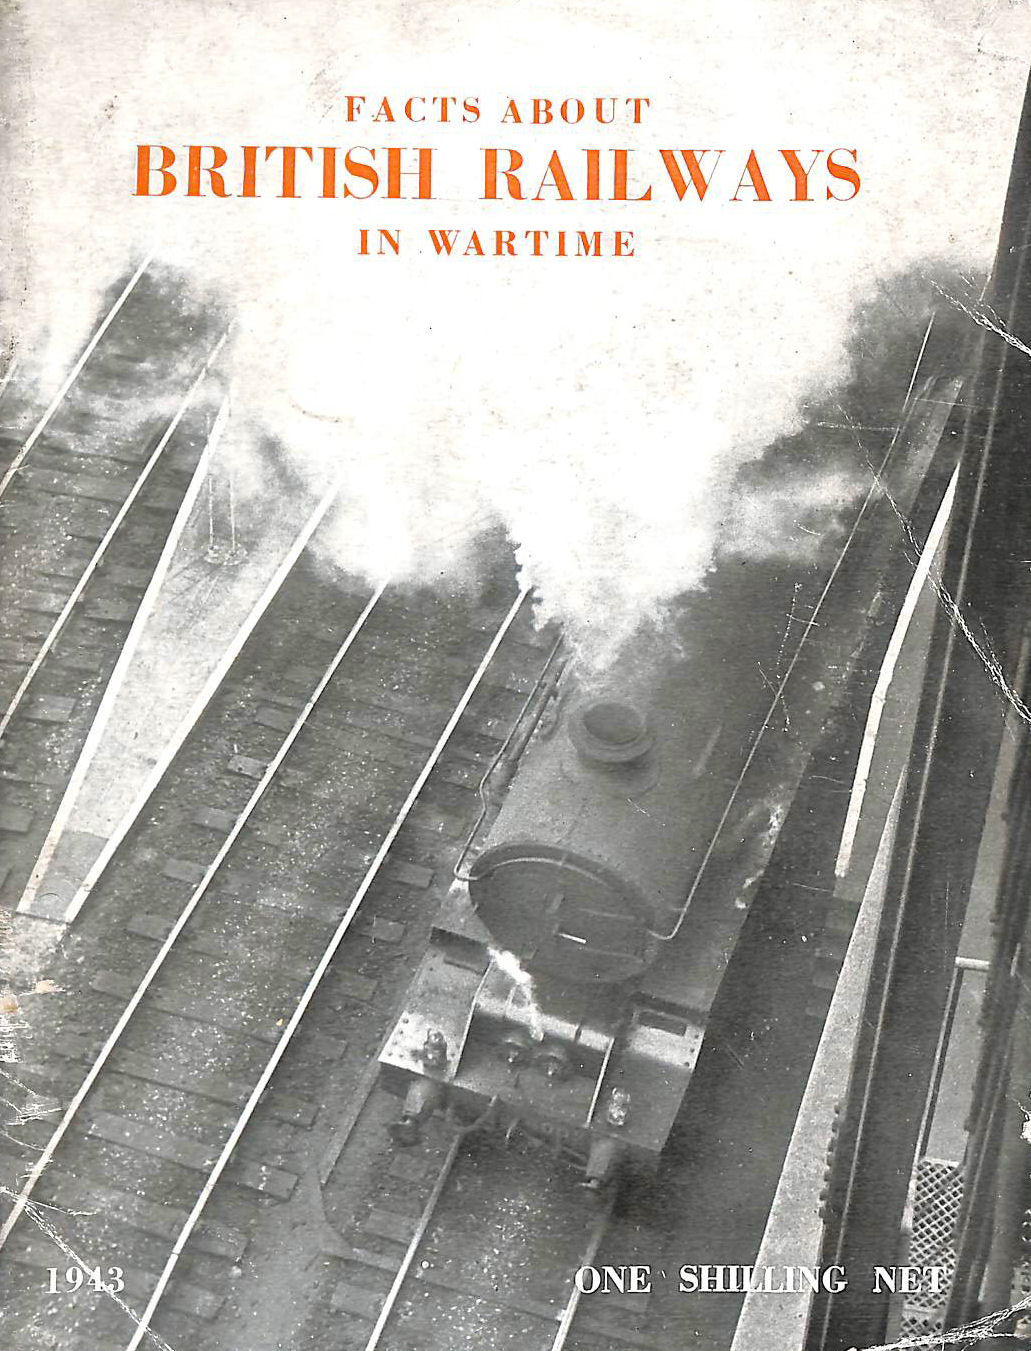 ANON - Facts About British Railways in Wartime 1943